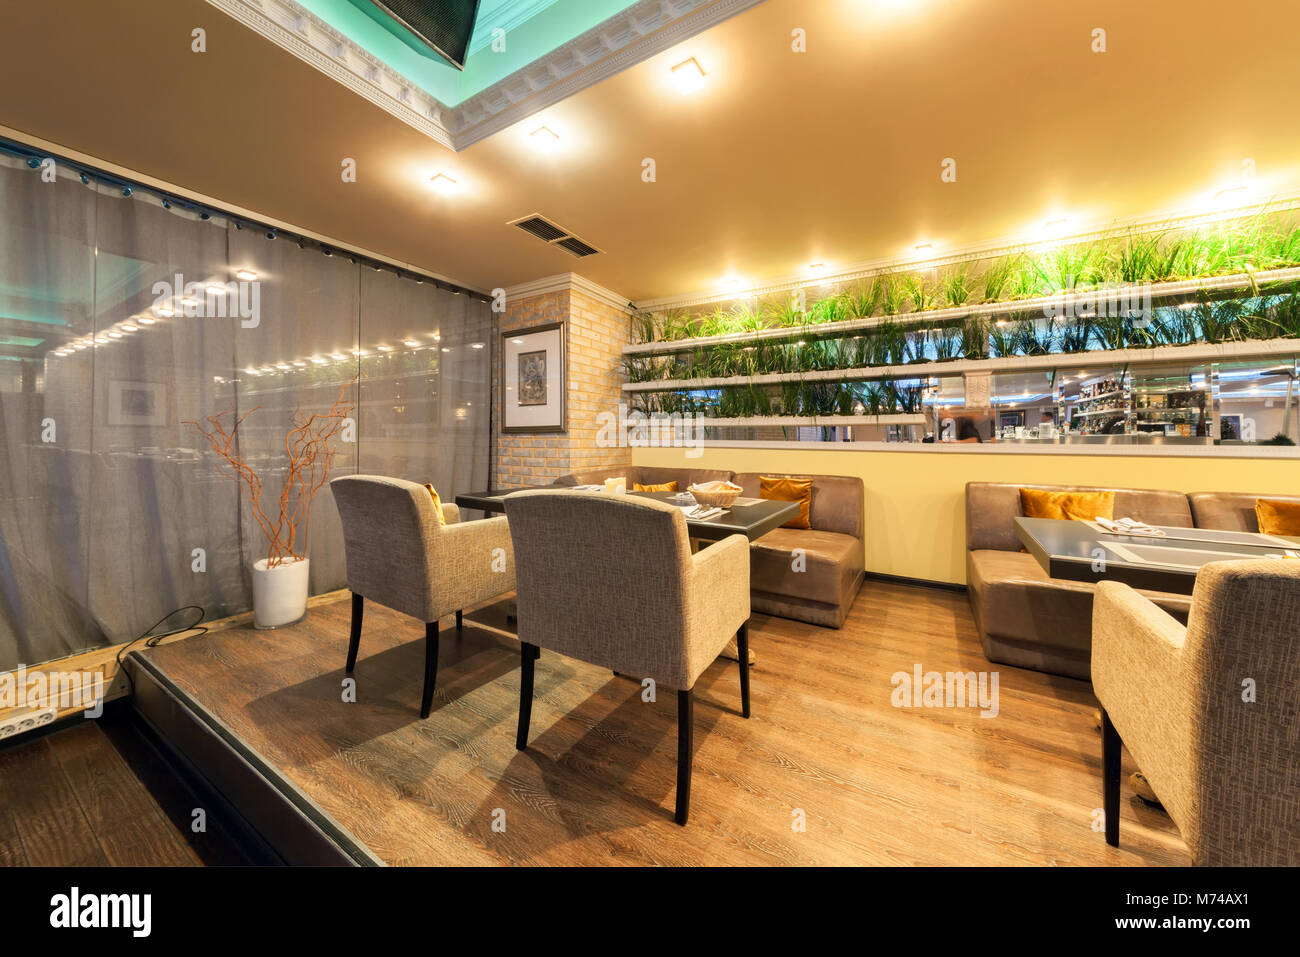 MOSCOW - JULY 2014: Interior of stylish Mediterranean cuisine Italian restaurant - 'SILLYCAT'. Restaurant room with a leather sofa, table and chairs Stock Photo